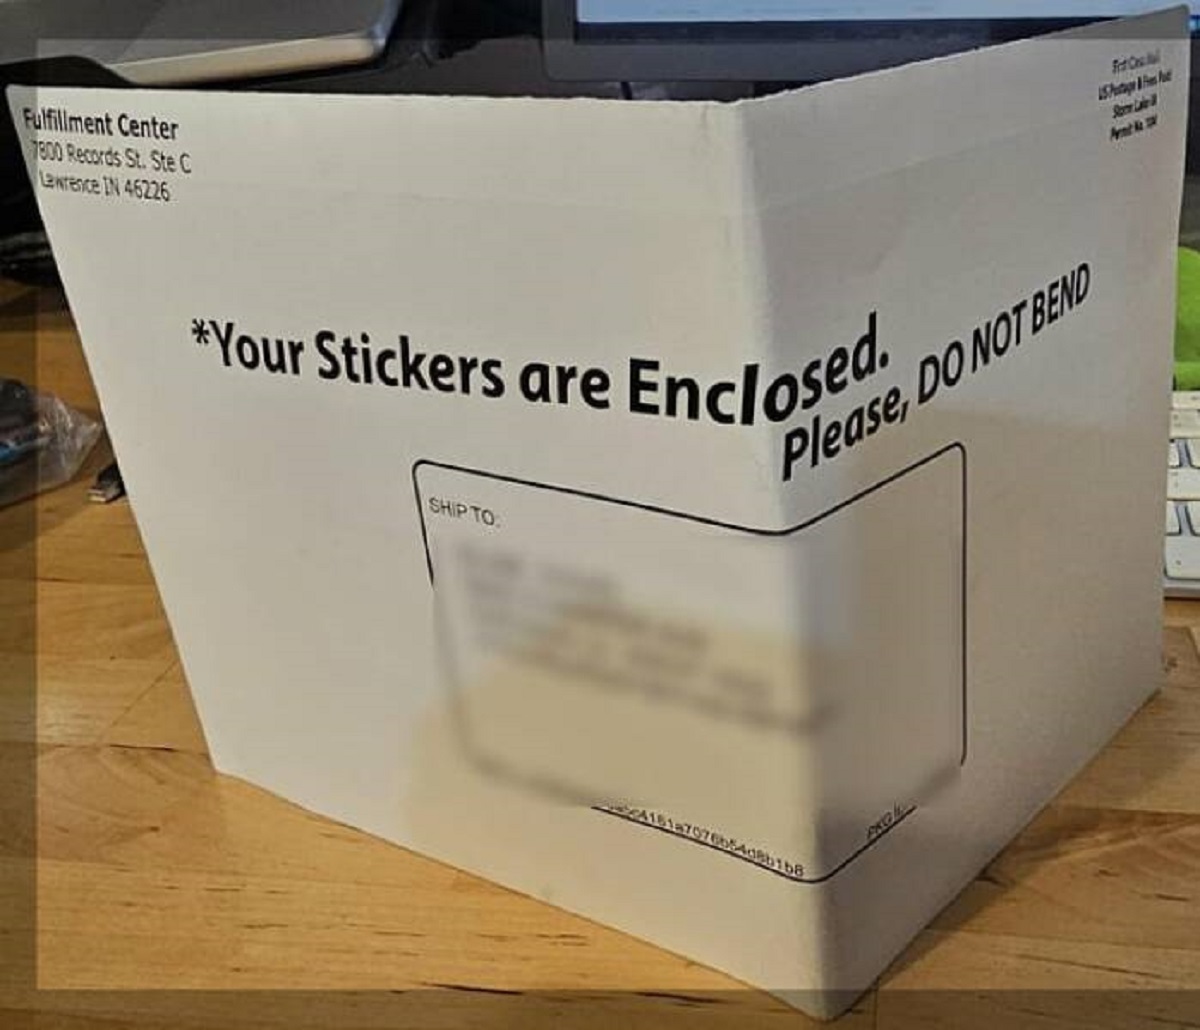 "It's almost like USPS did this on purpose... and yes, the stickers were folded and ruined"